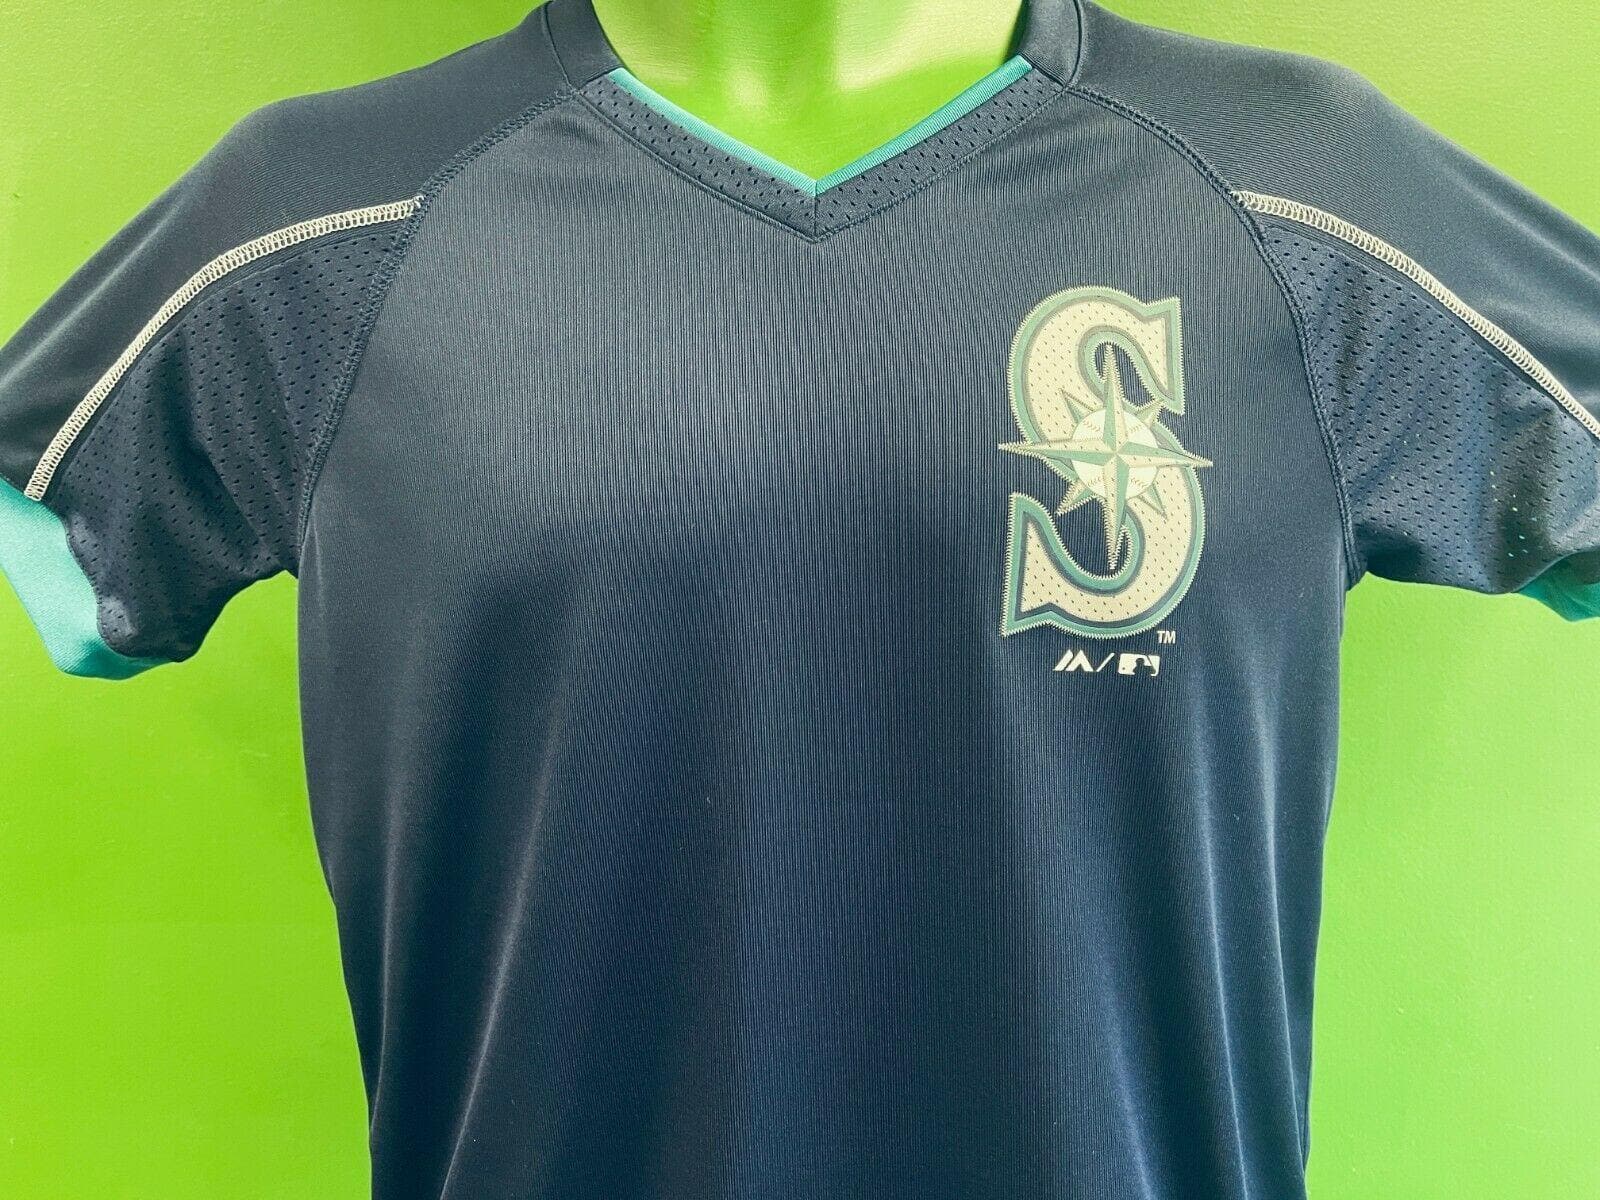 MLB Seattle Mariners Majestic Jersey-Style Top Youth Large 14-16